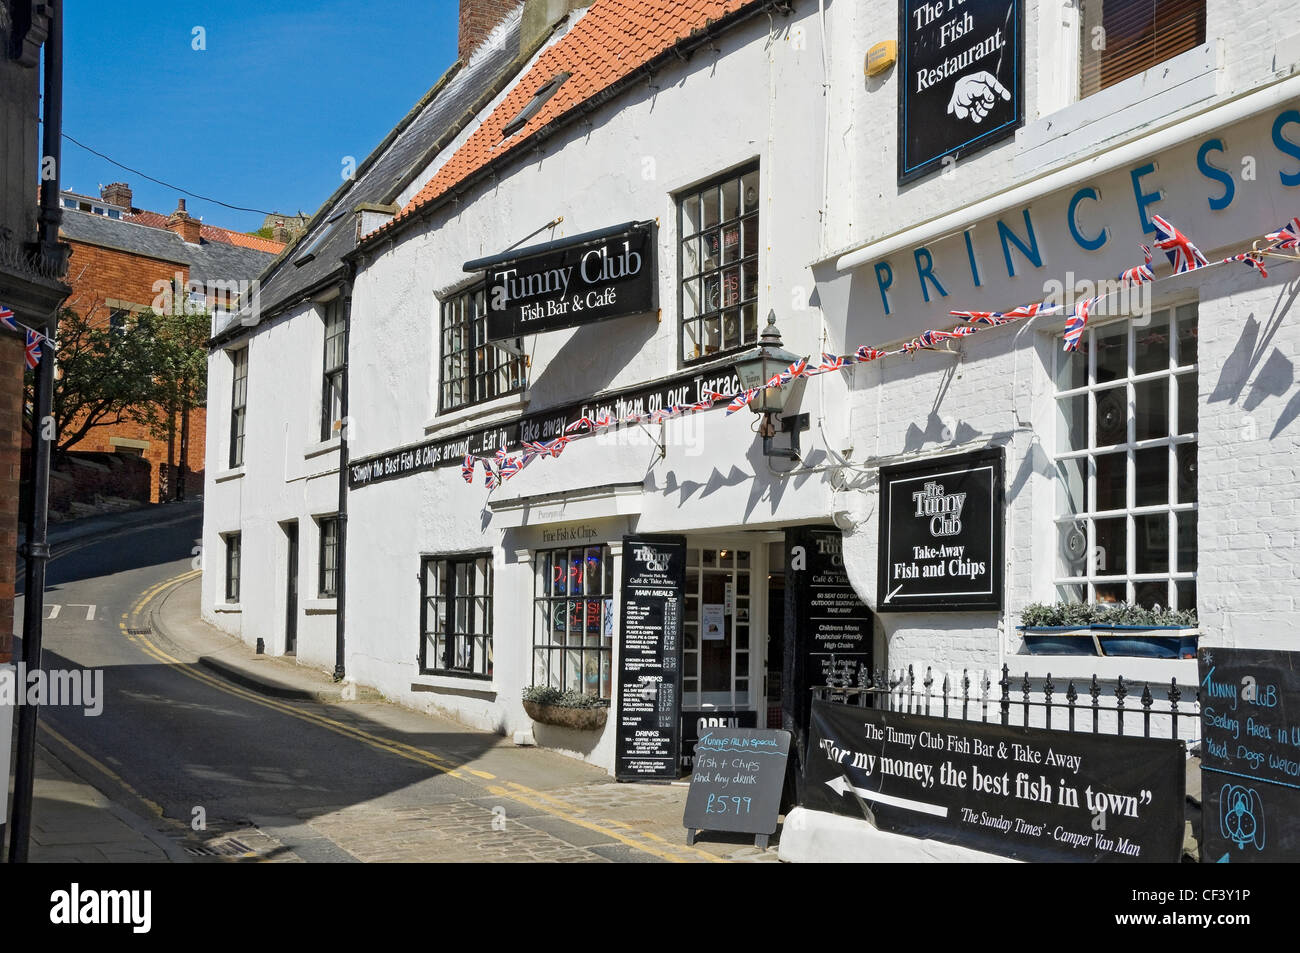 The famous Tunny Club Fish Bar & Cafe off Sandside. Stock Photo